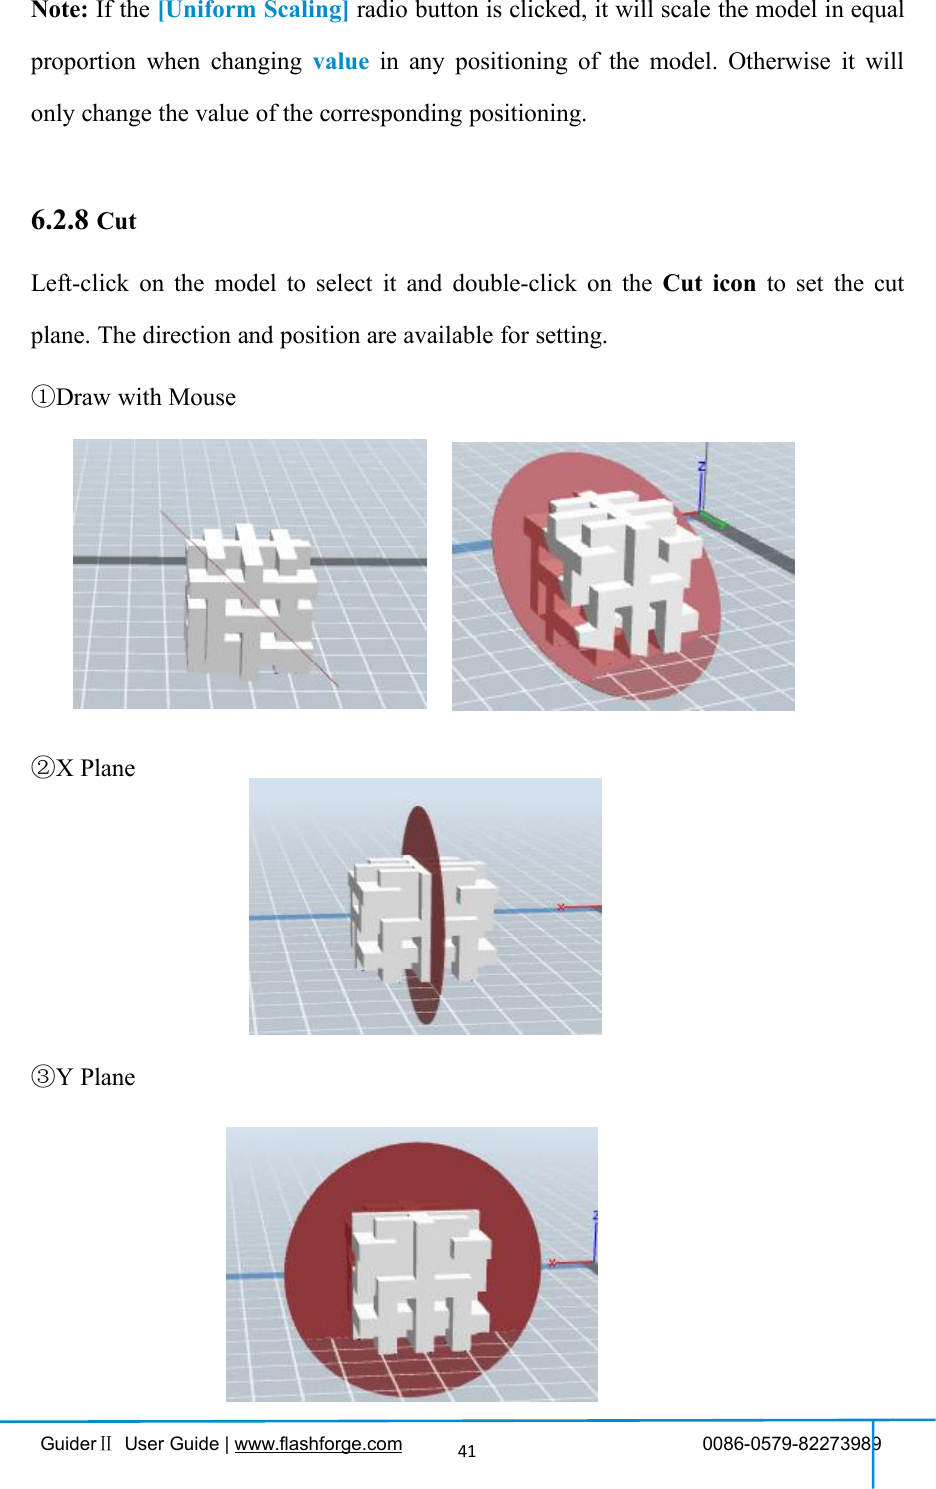 GuiderⅡUser Guide | www.flashforge.com 0086-0579-8227398941Note: If the [Uniform Scaling] radio button is clicked, it will scale the model in equalproportion when changing value in any positioning of the model. Otherwise it willonly change the value of the corresponding positioning.6.2.8 CutLeft-click on the model to select it and double-click on the Cut icon to set the cutplane. The direction and position are available for setting.①Draw with Mouse②X Plane③Y Plane